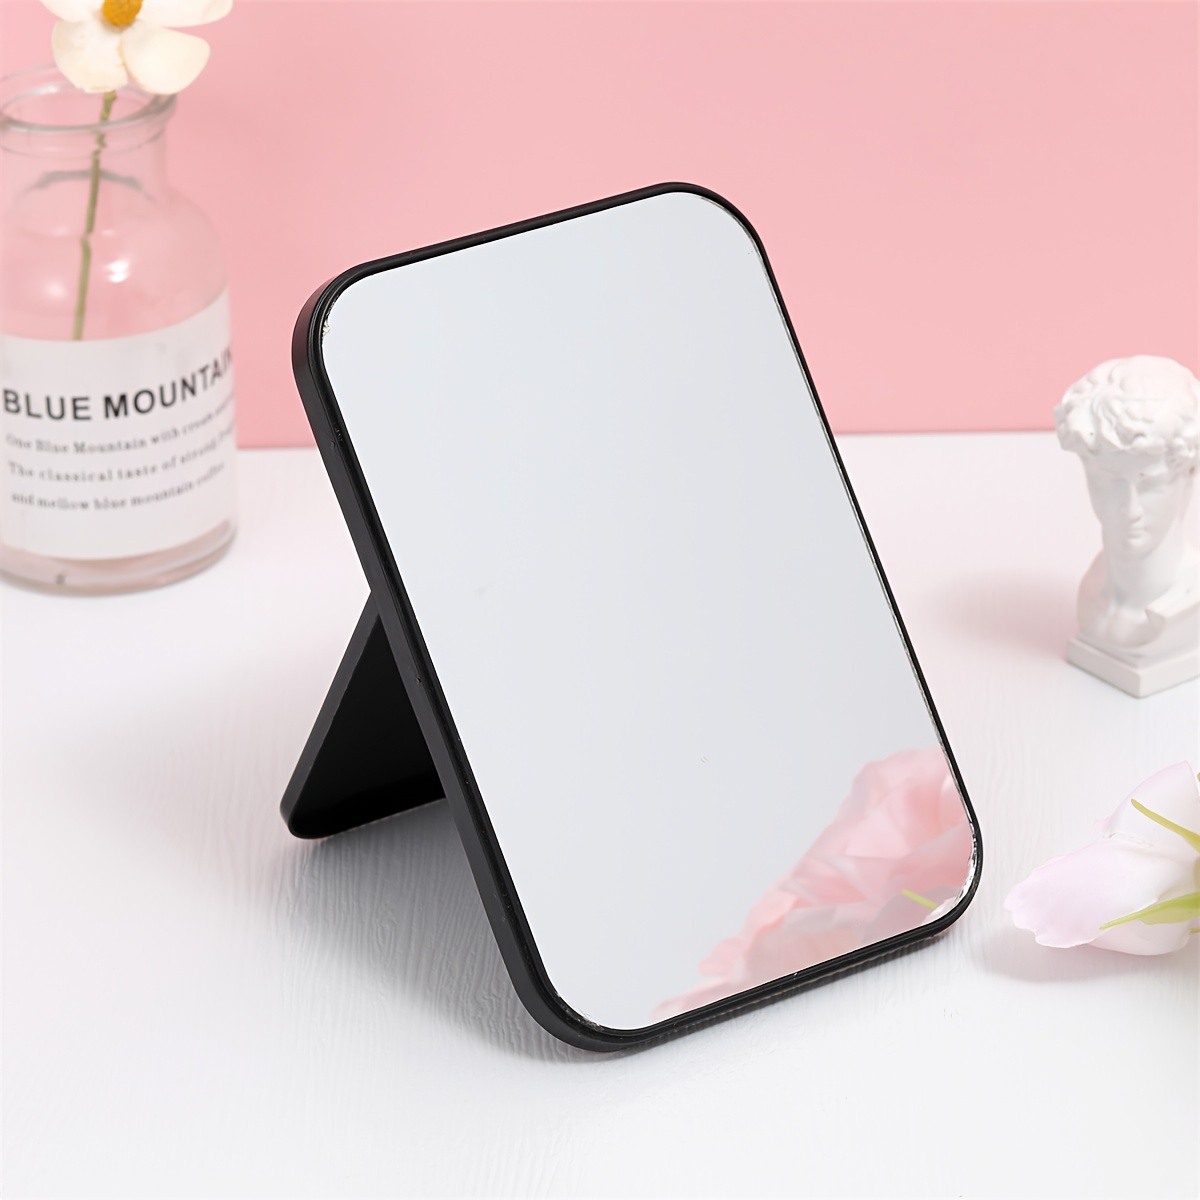 

Desktop Folding Portable Makeup Mirror Student Dormitory Small Vanity Mirror Travel Gift For Mother Ladies - Mother's Day Makeup Mirror